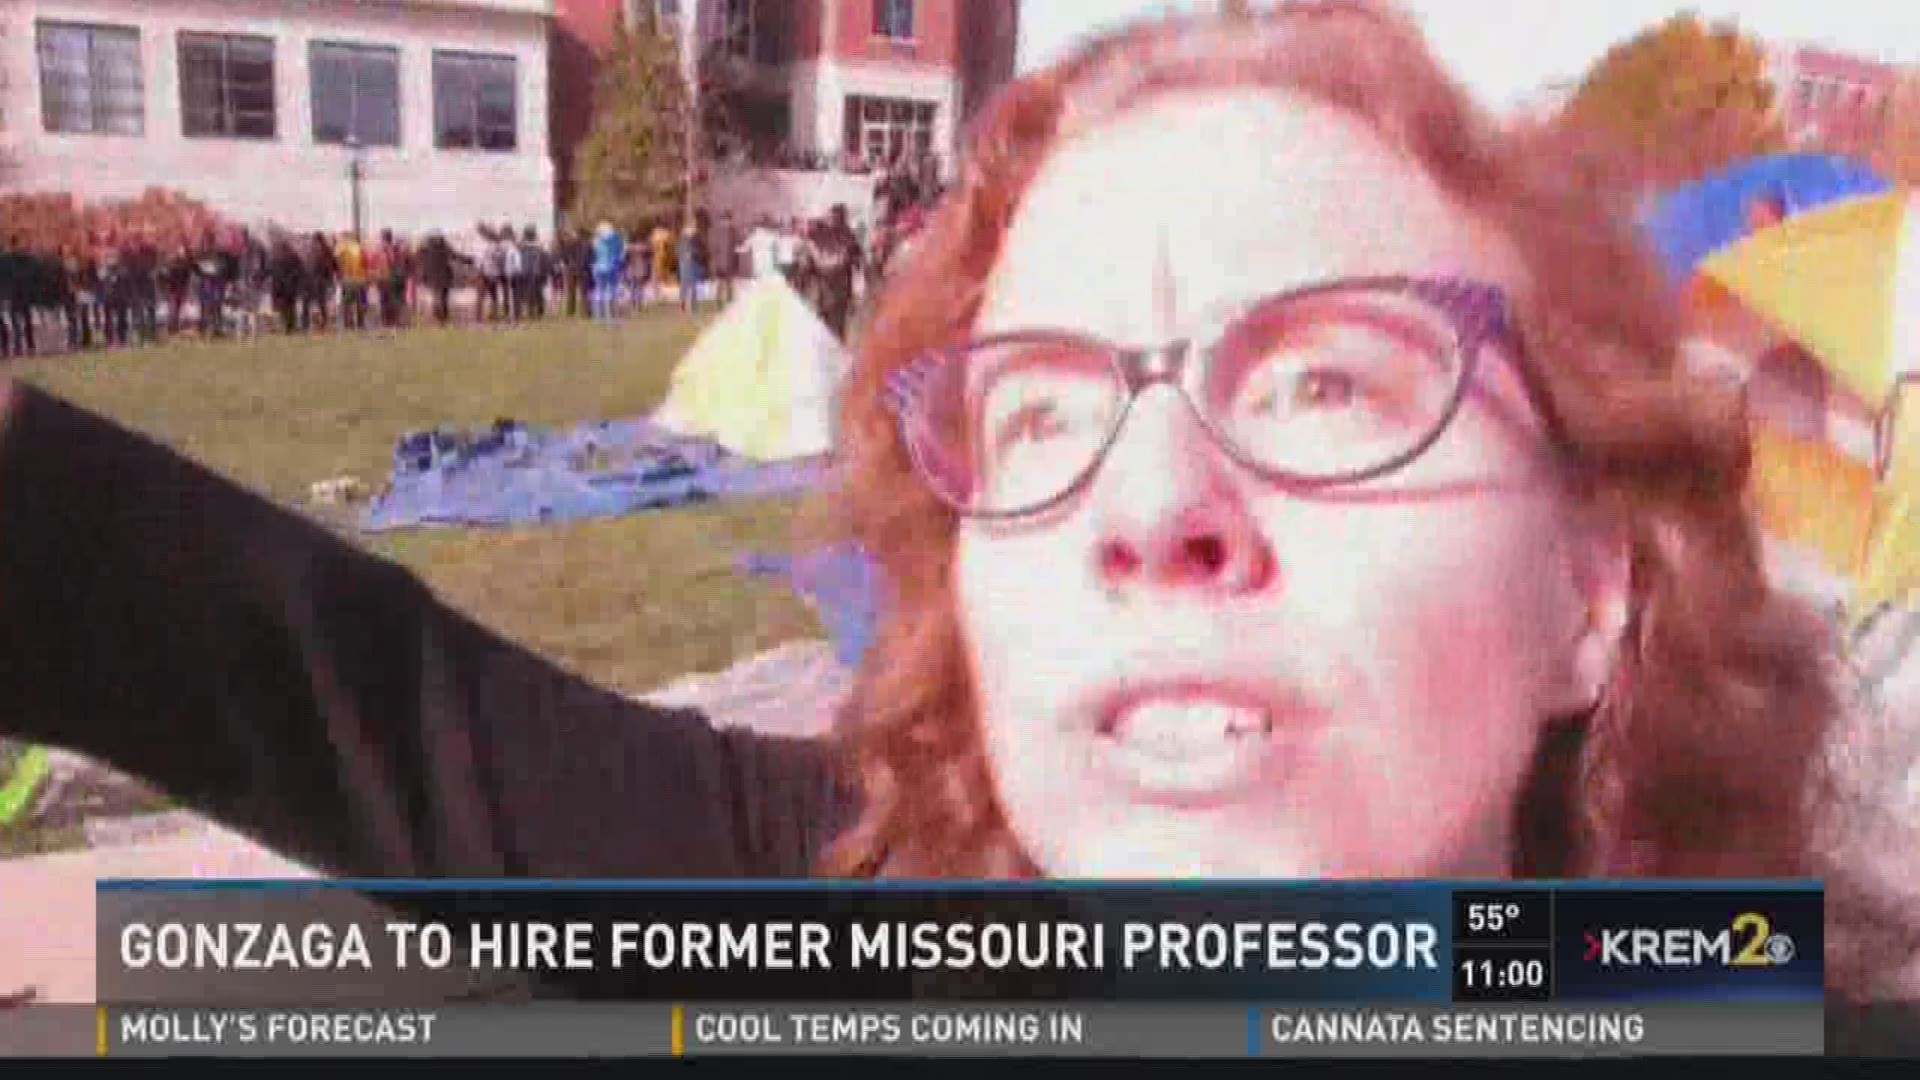 Gonzaga University hired a former University of Missouri professor who was fired after she was featured in a controversial viral video. In the clip, she calls for "some muscle" to remove a journalist from a protest at MU. (9/2/16)